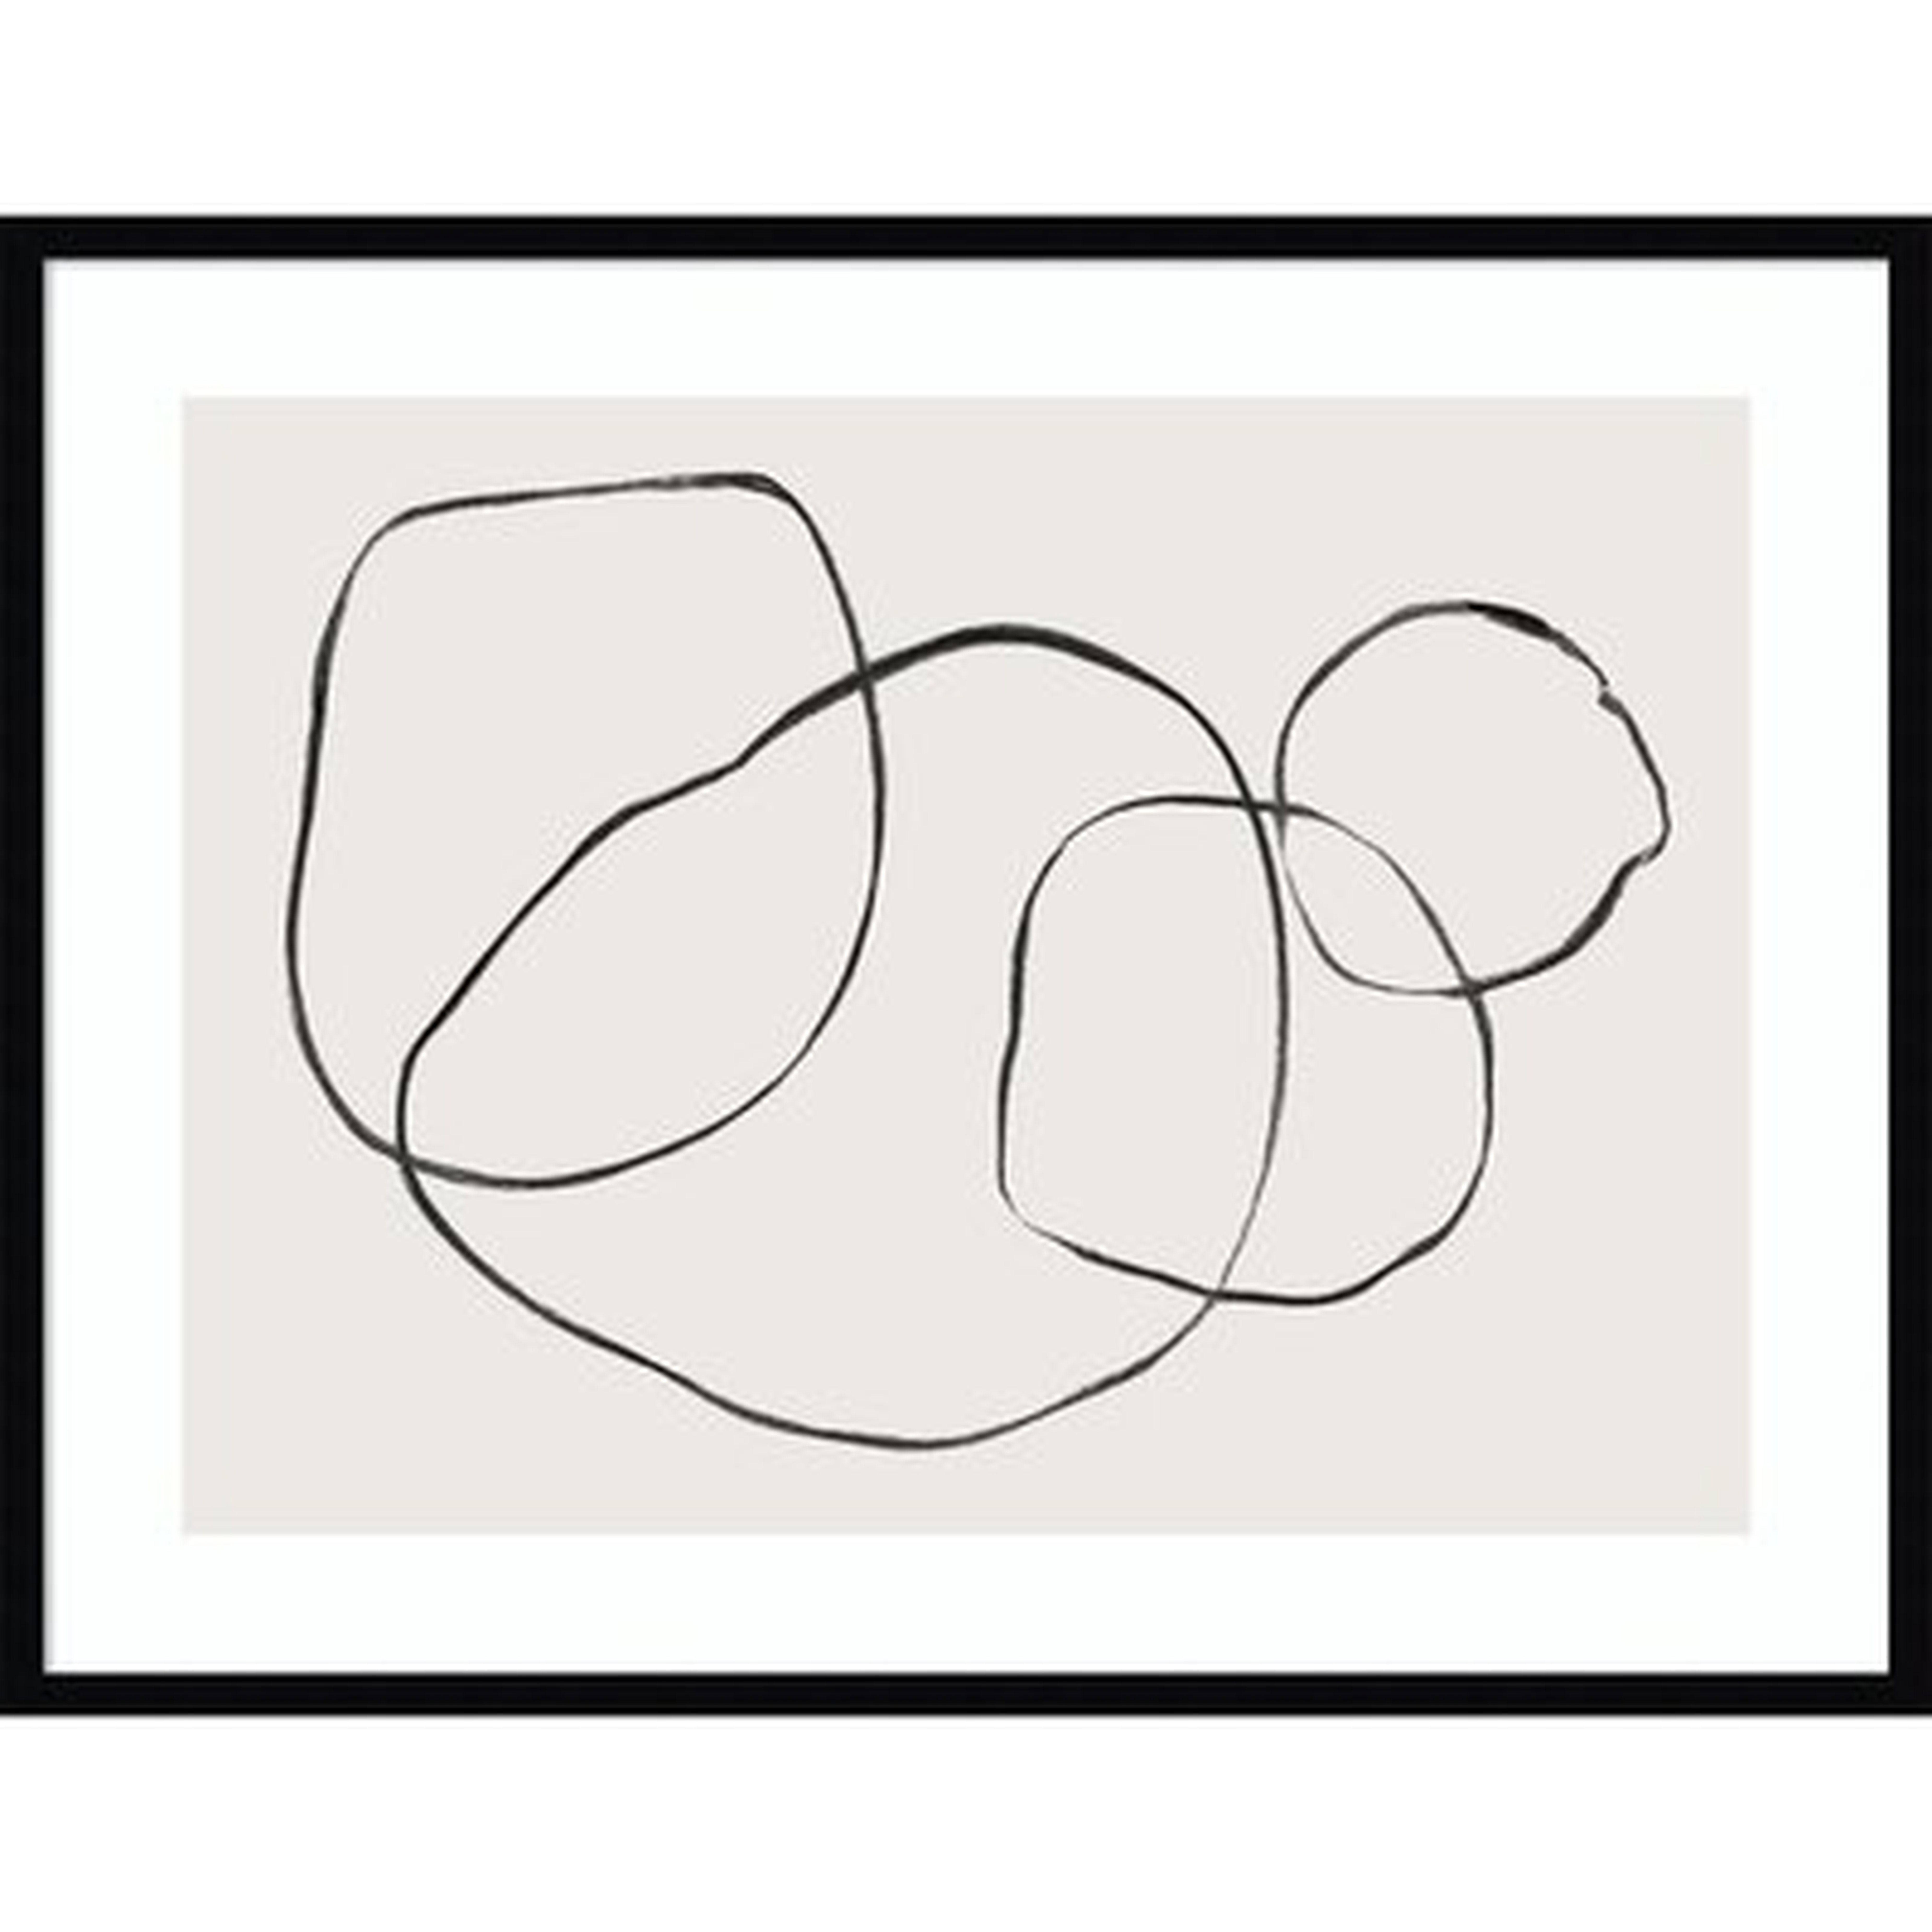 Teju Reval 869 Going in Circles by Teju Reval - Graphic Art Print on Paper - Wayfair